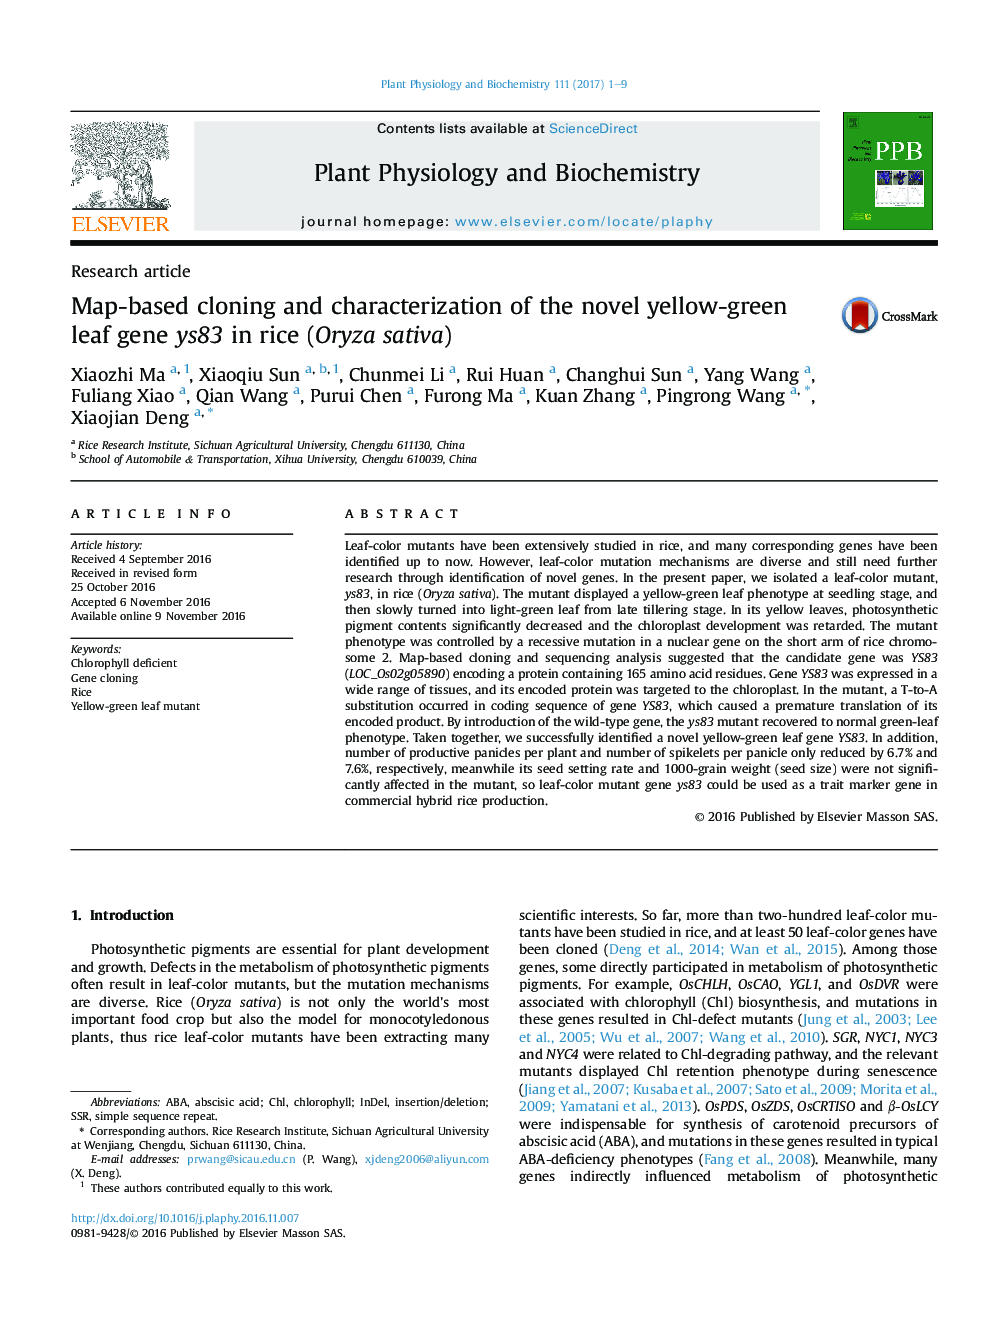 Research articleMap-based cloning and characterization of the novel yellow-green leaf gene ys83 in rice (Oryza sativa)